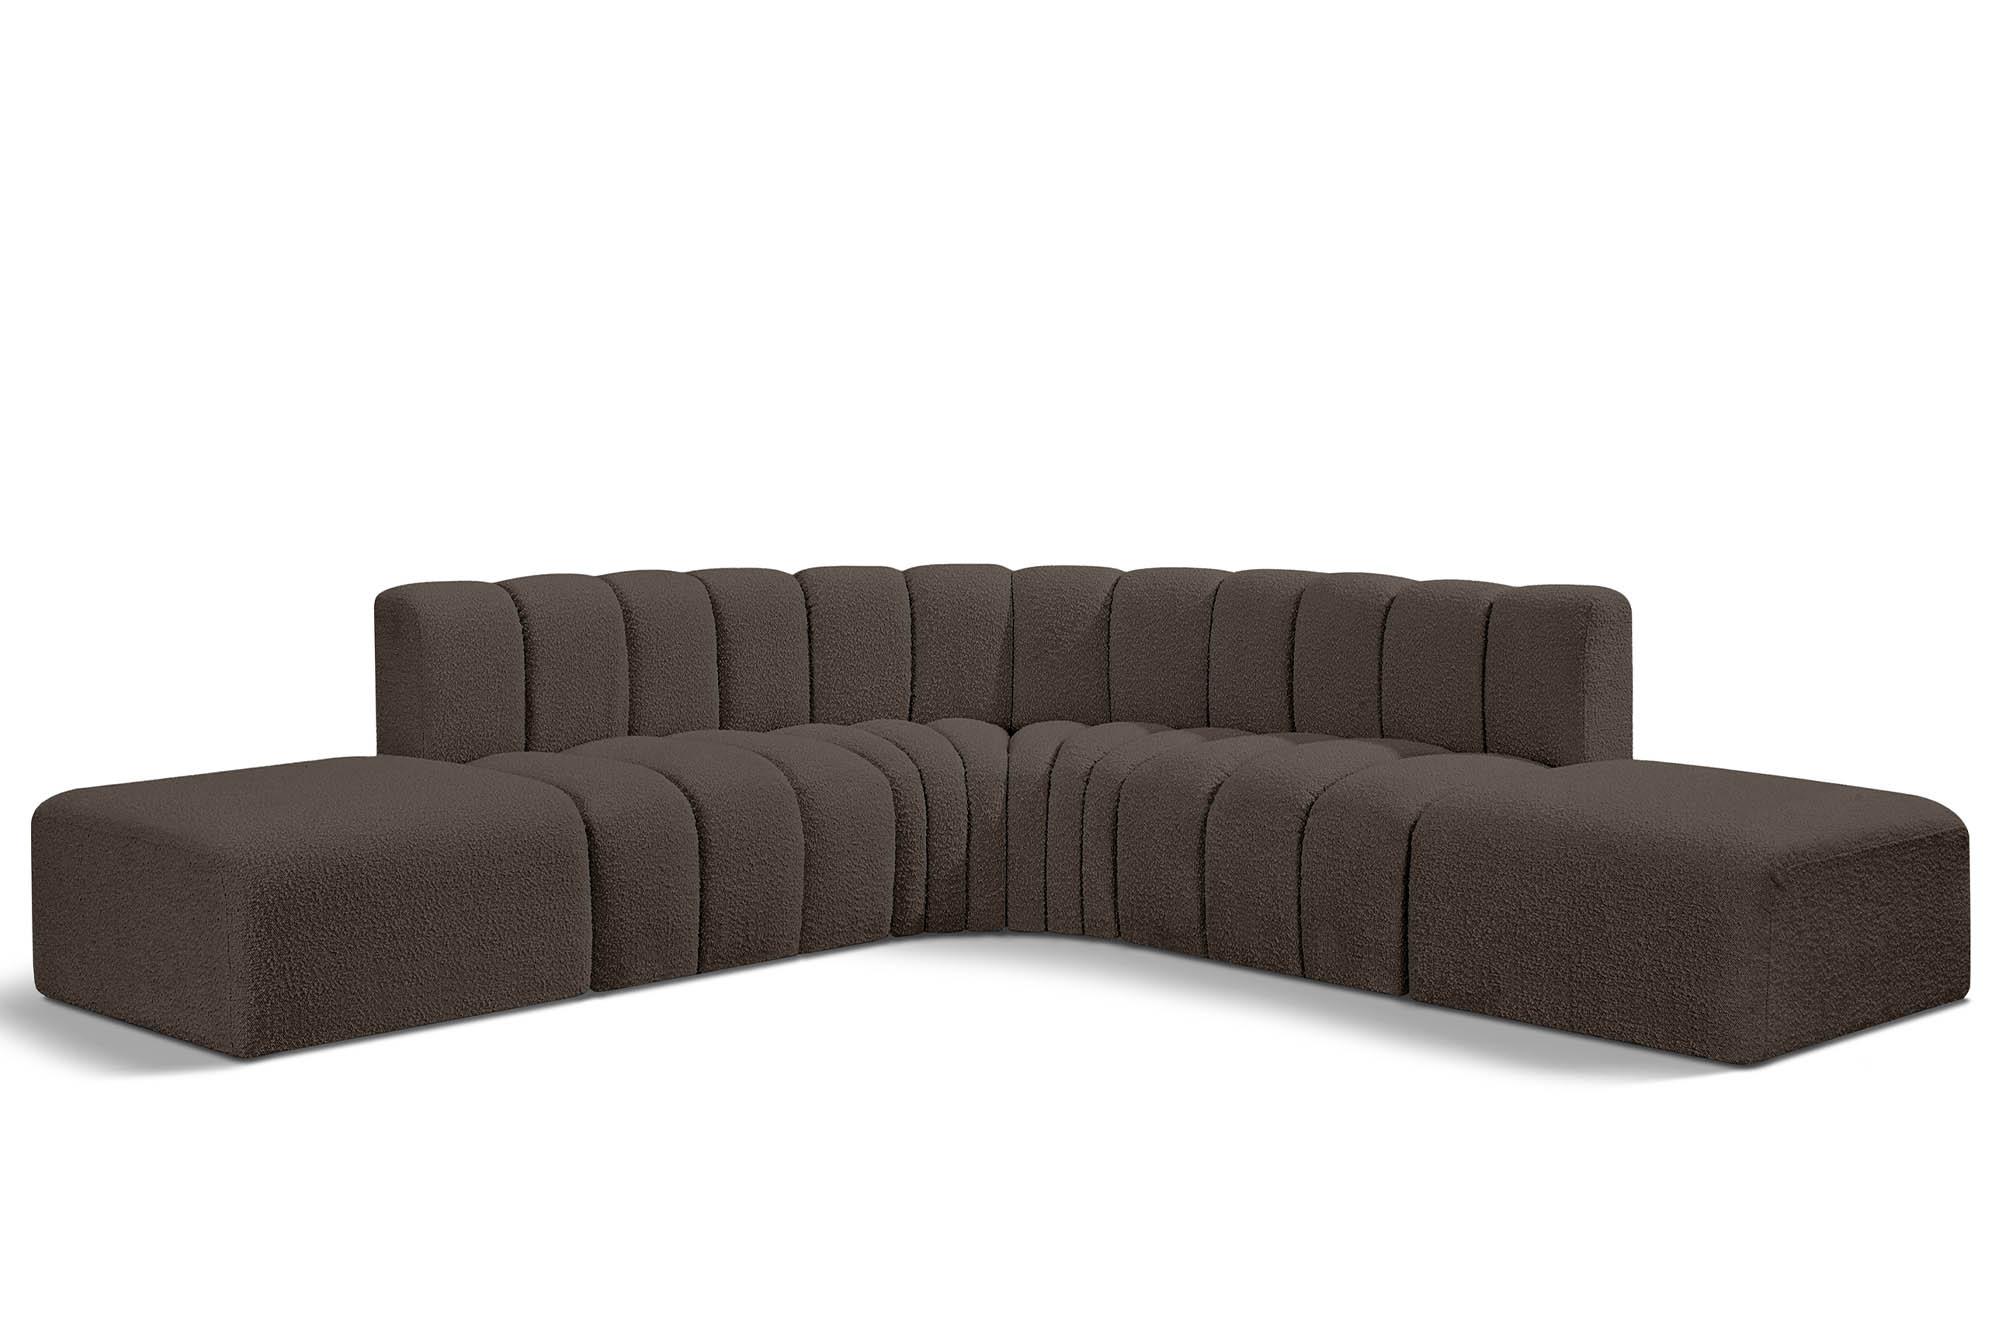 Contemporary, Modern Modular Sectional Sofa ARC 102Brown-S6C 102Brown-S6C in Brown 